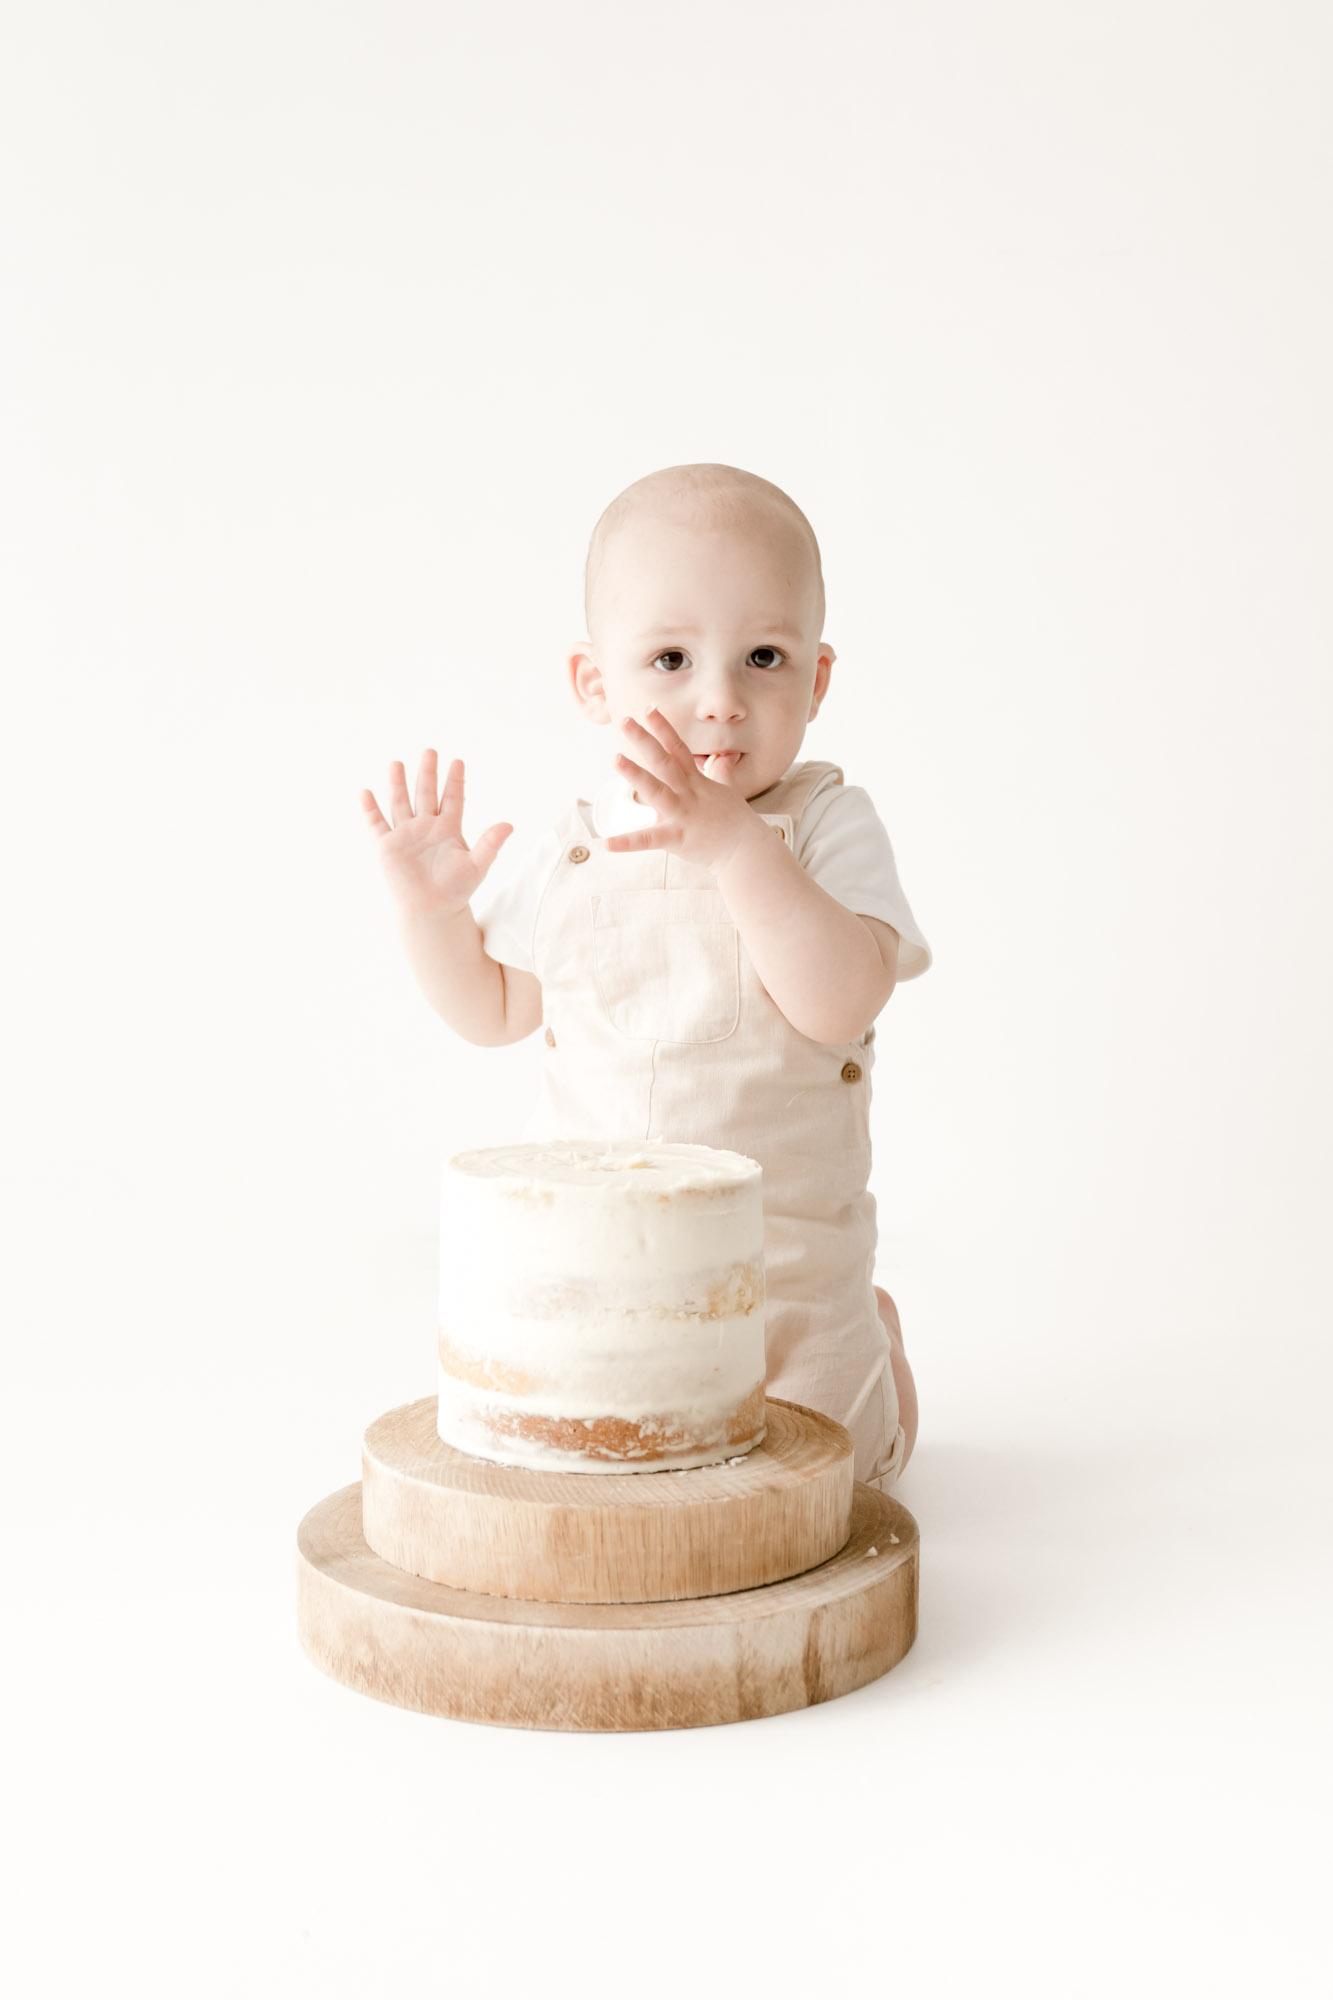 Baby boy cake smash photography in Colchester